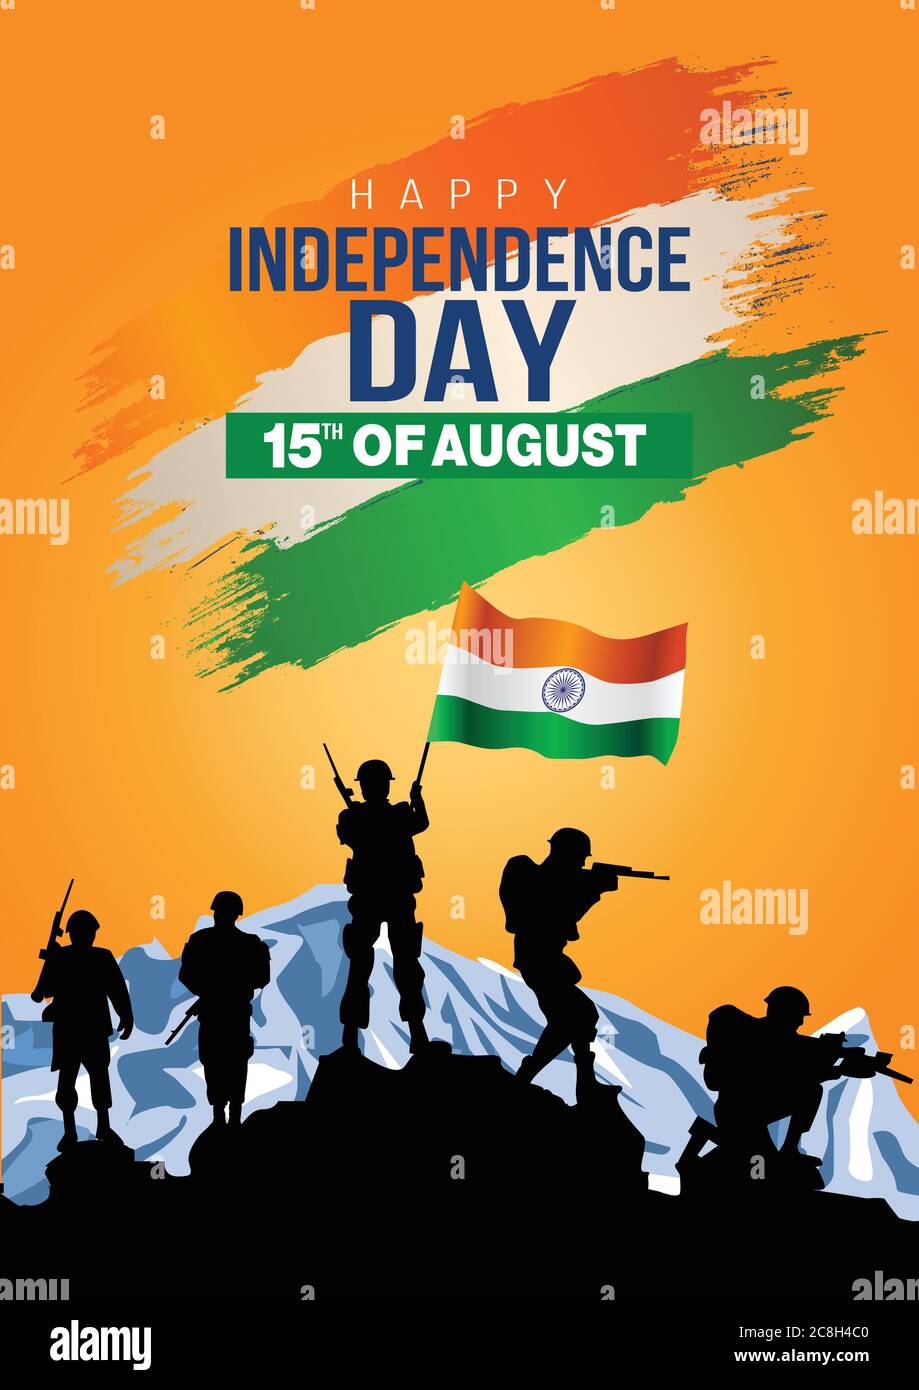 happy independence day India. vector illustration of Indian army ...